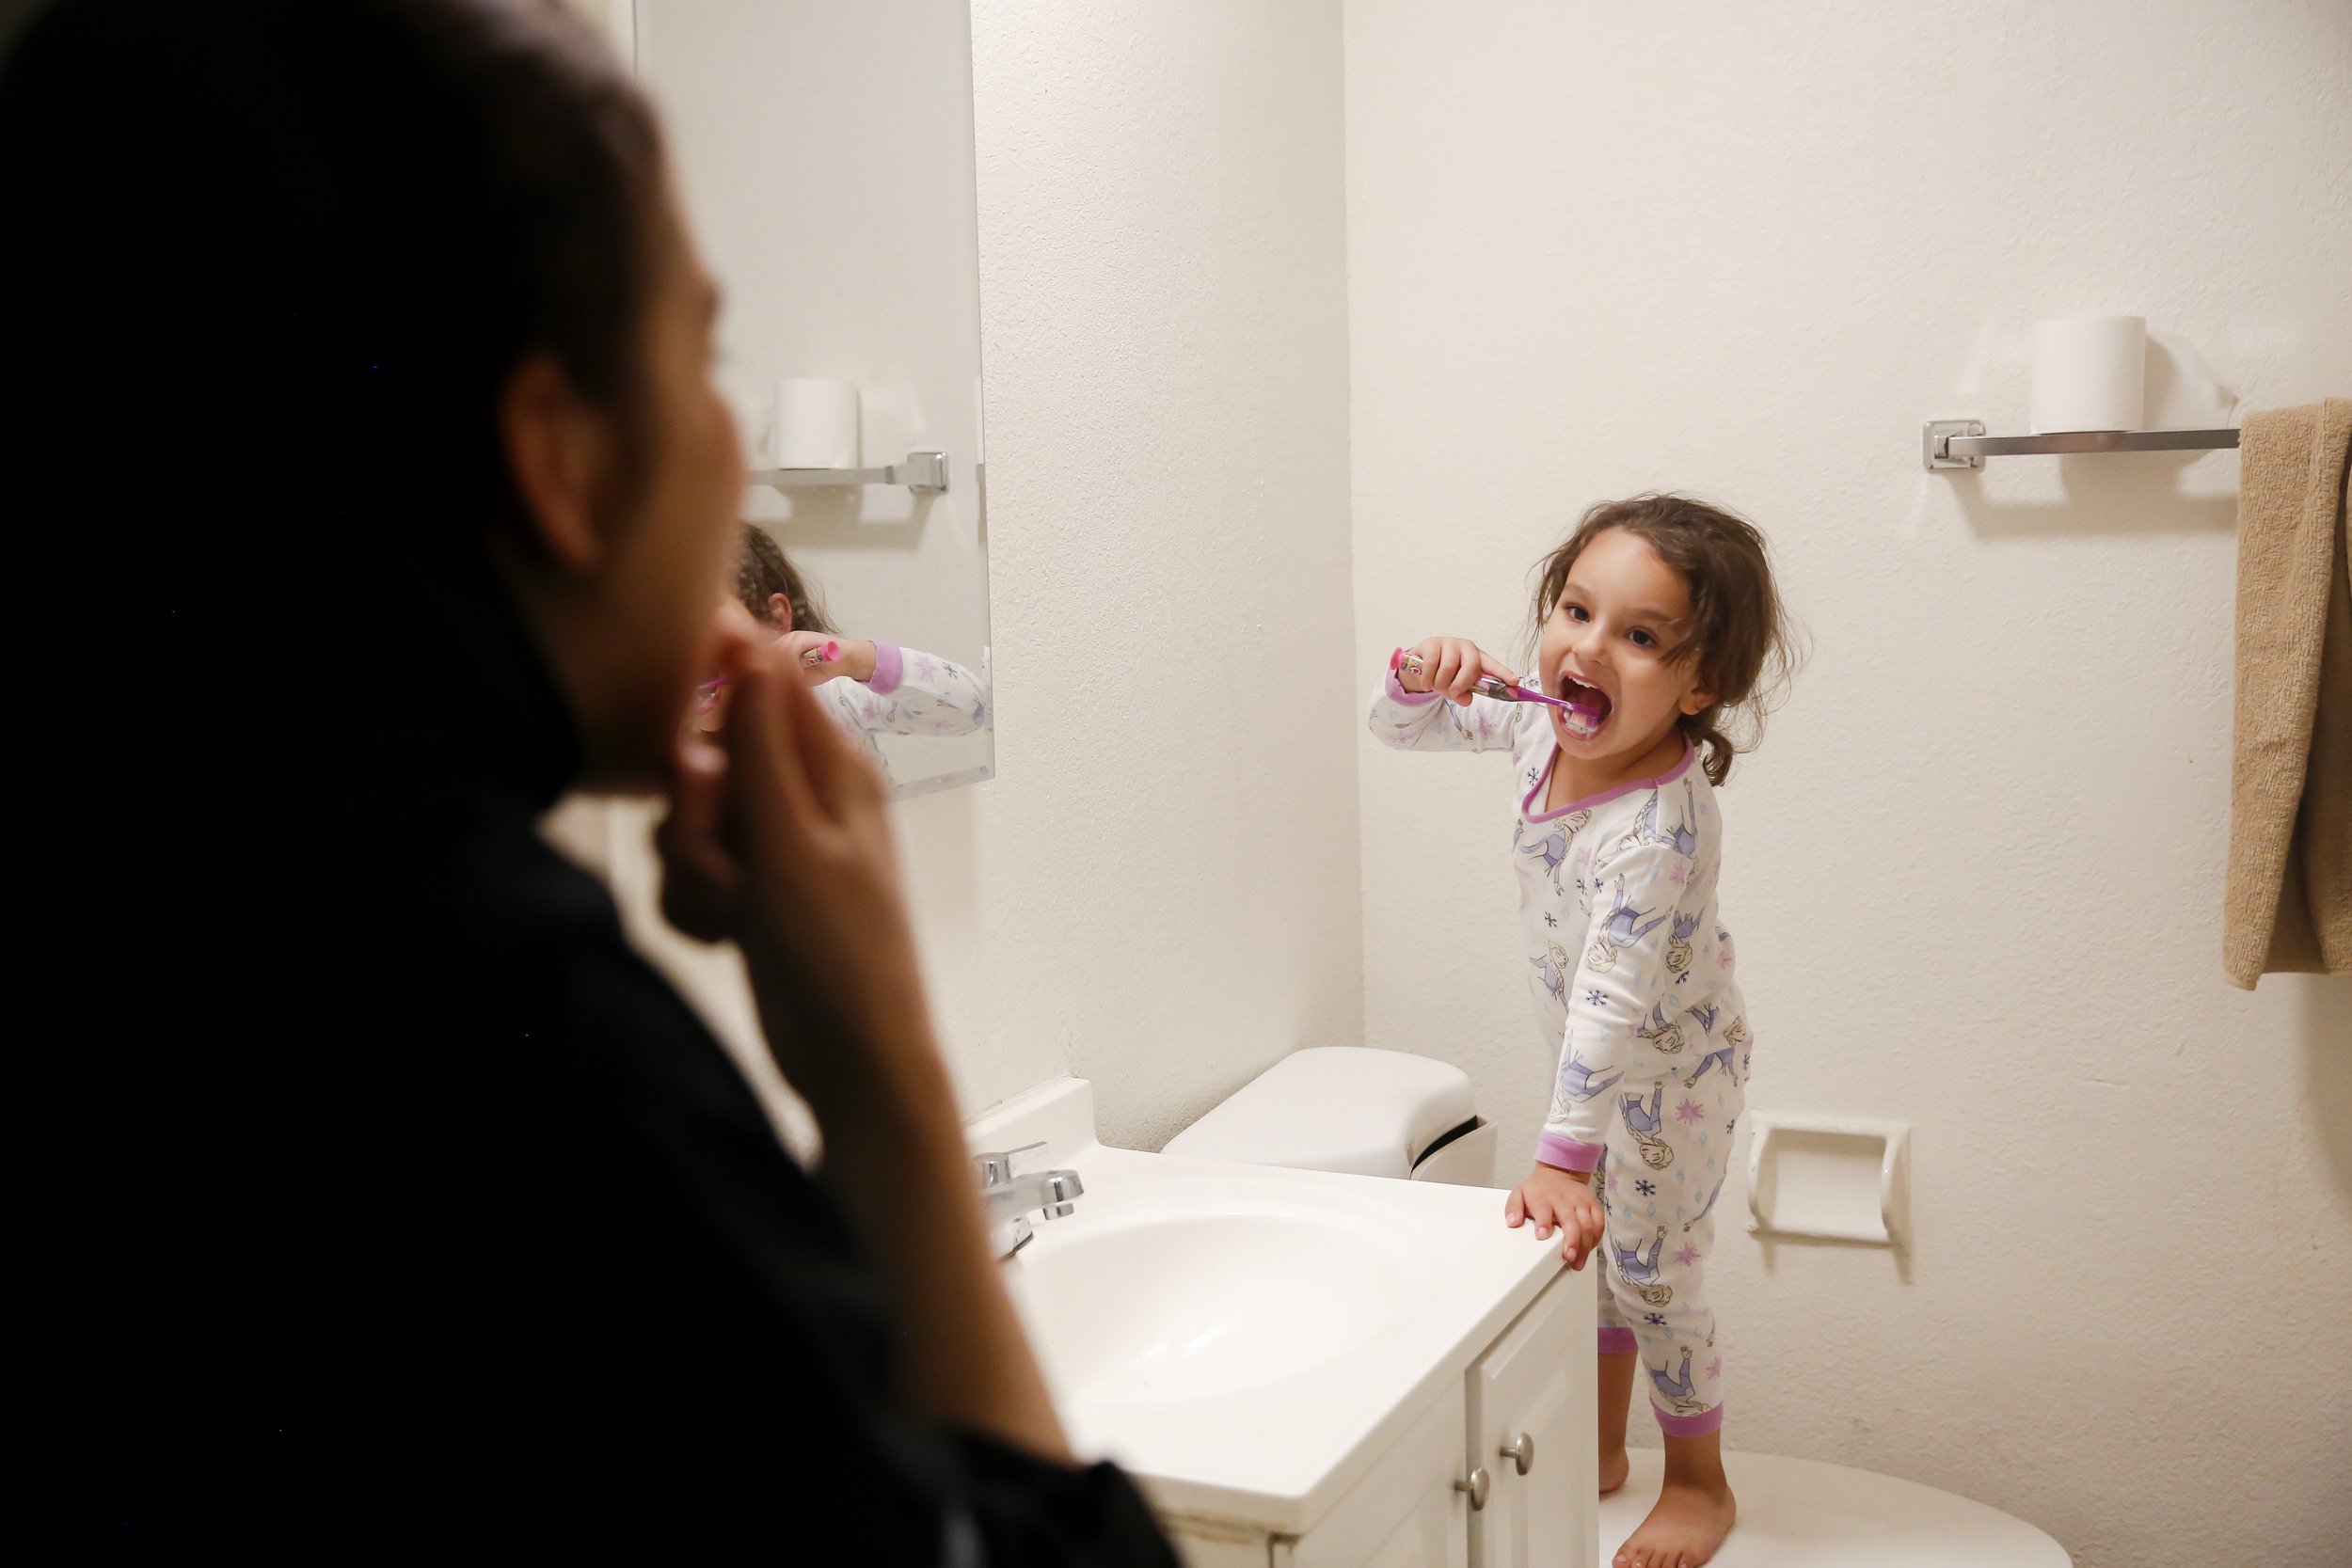  Zahra Mohammadi (3) brushes her teeth while her mother, Susan Mohammadi, watches at their home in Sacramento, Calif. on Thursday, April 21, 2022. Najibullah Mohammadi, his wife Susan, their two young children Zahra and Yasar, and their soon-to-be bo